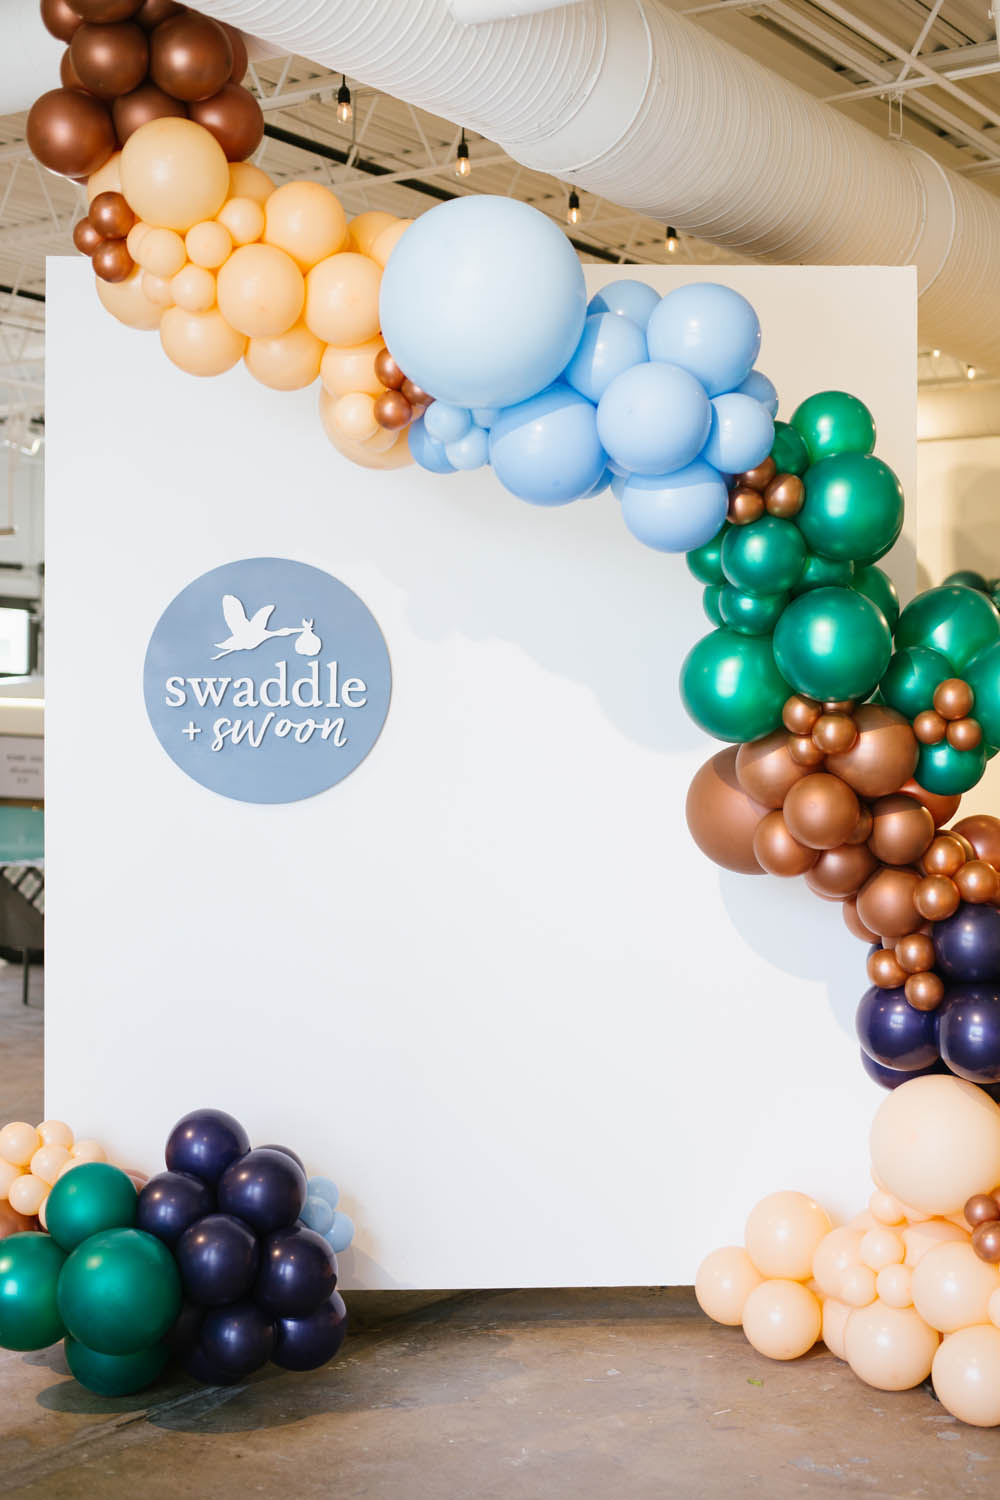 Baby shower ideas from Swaddle & Swoon Atlanta